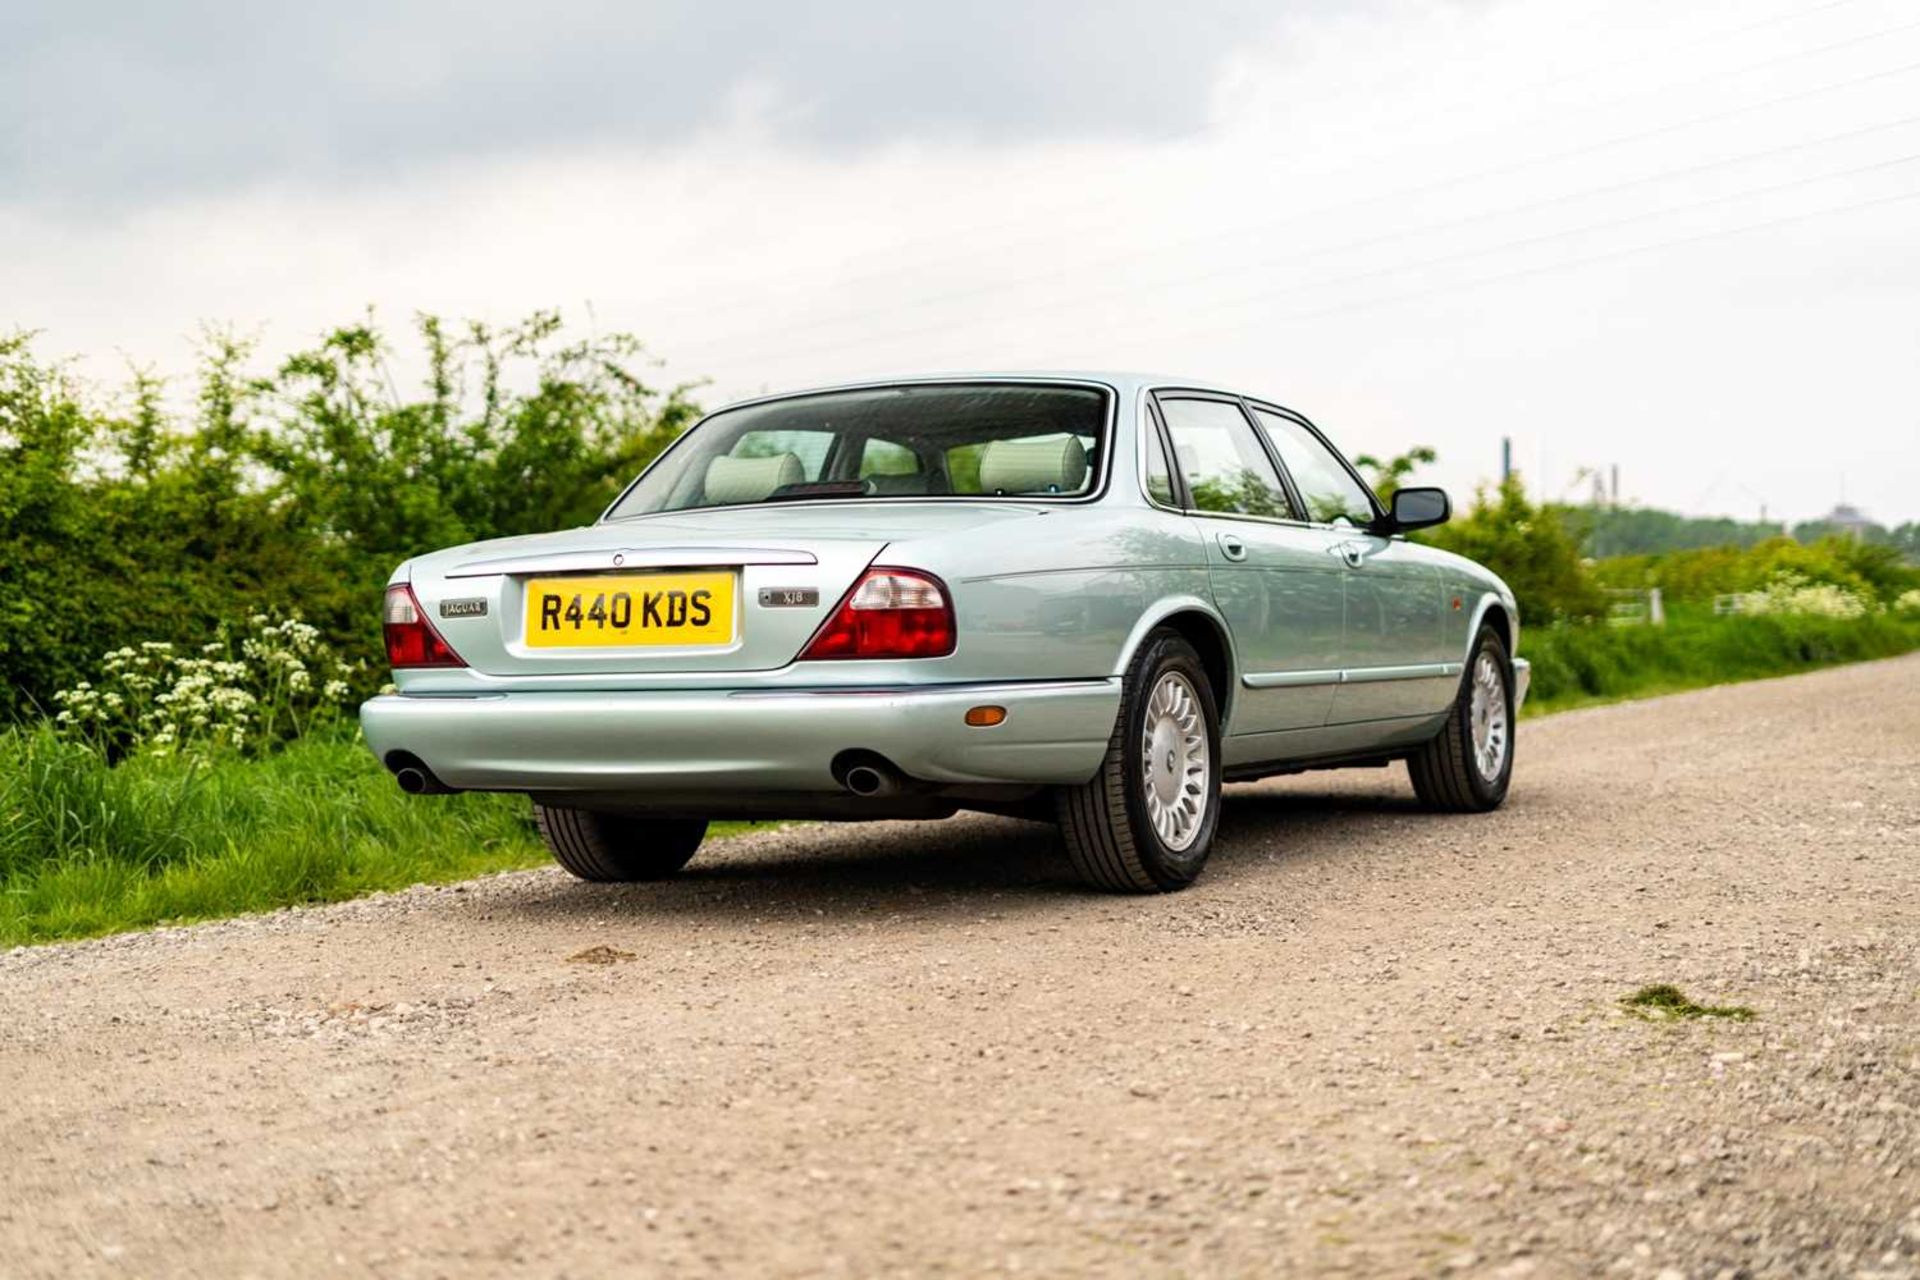 1998 Jaguar XJ8 ***NO RESERVE*** Just 40,000 miles from new and 1 owner from new - Image 9 of 58